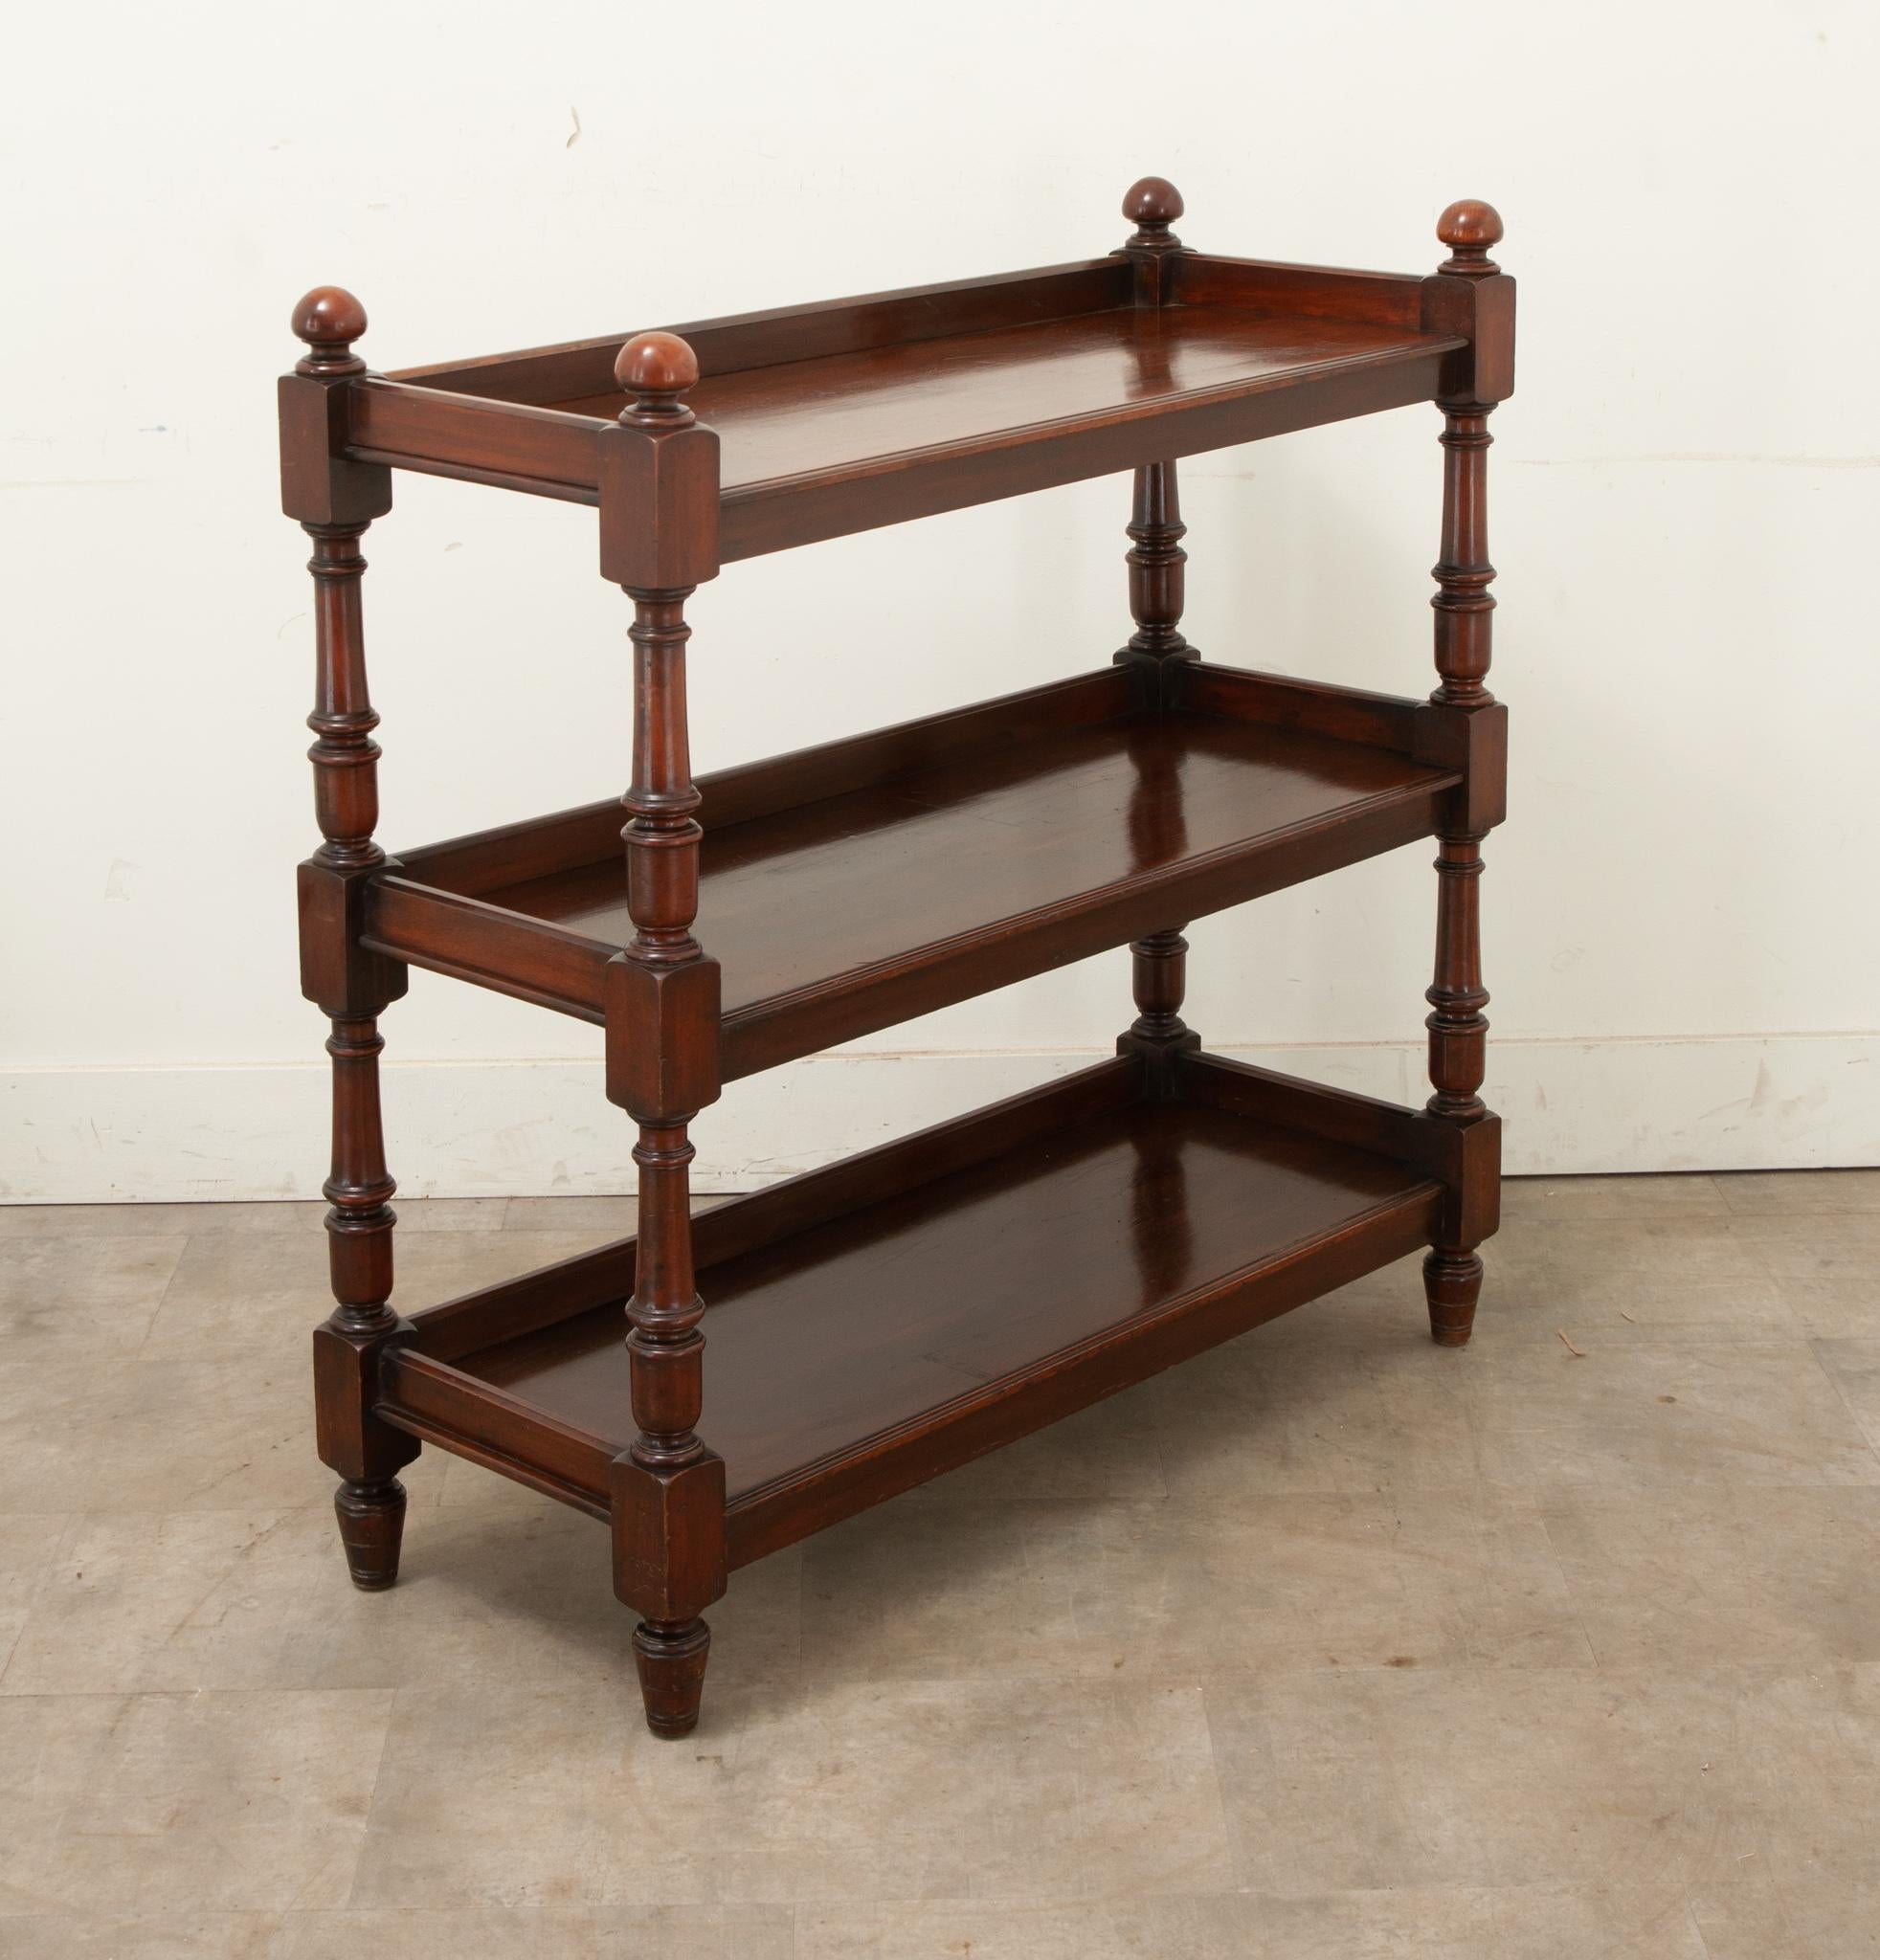 A tiered English trolley made in the 19th century. This mahogany is rich in color and has three tiered shelves. The four legs are turned and capped with turned flat finials. Cleaned and polished with a paste wax this antique is ready for your